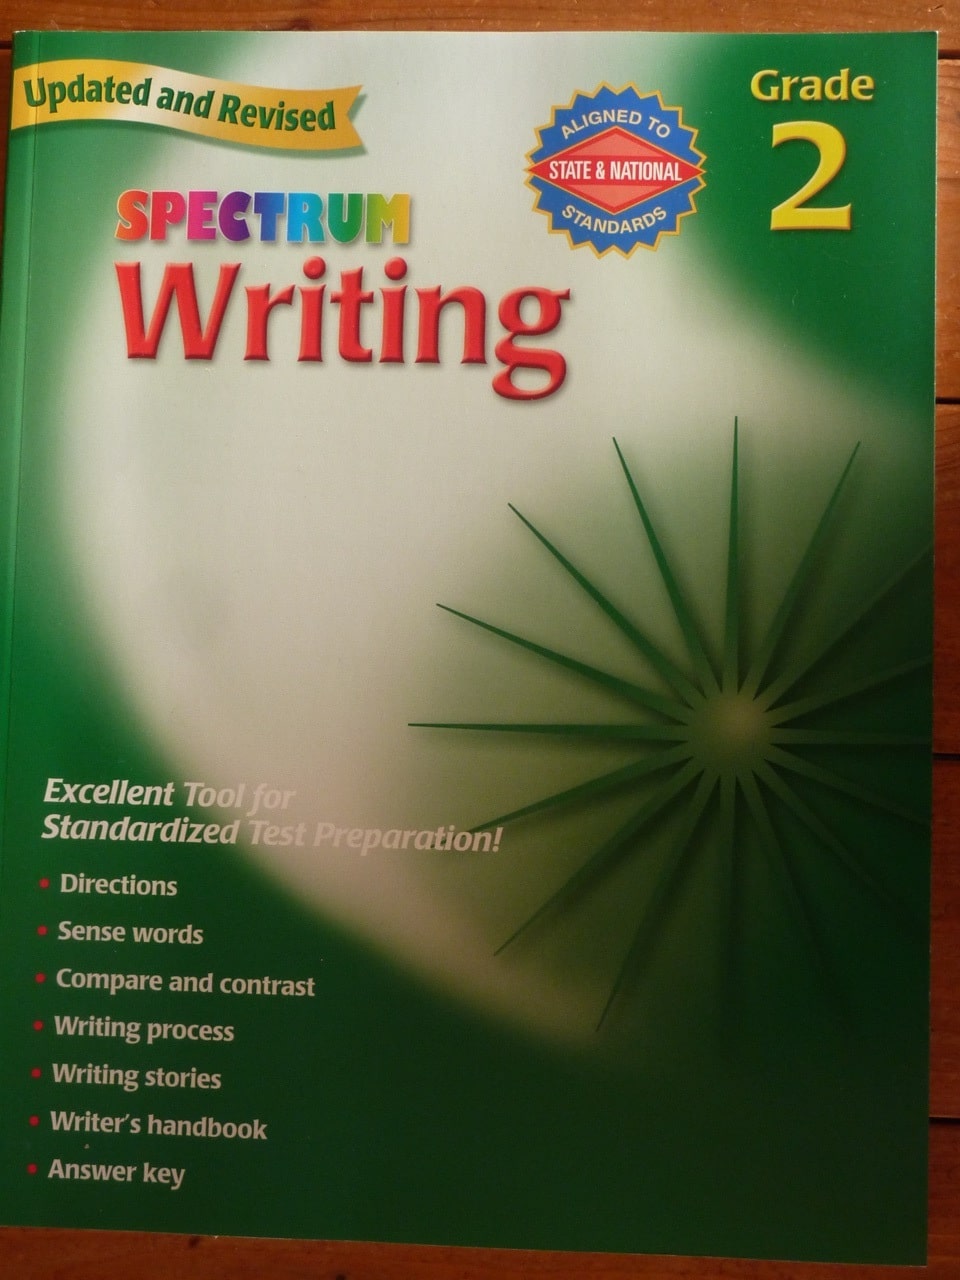 Learn Basic Writing Skills with Spectrum Writing 2nd Grade – My Review